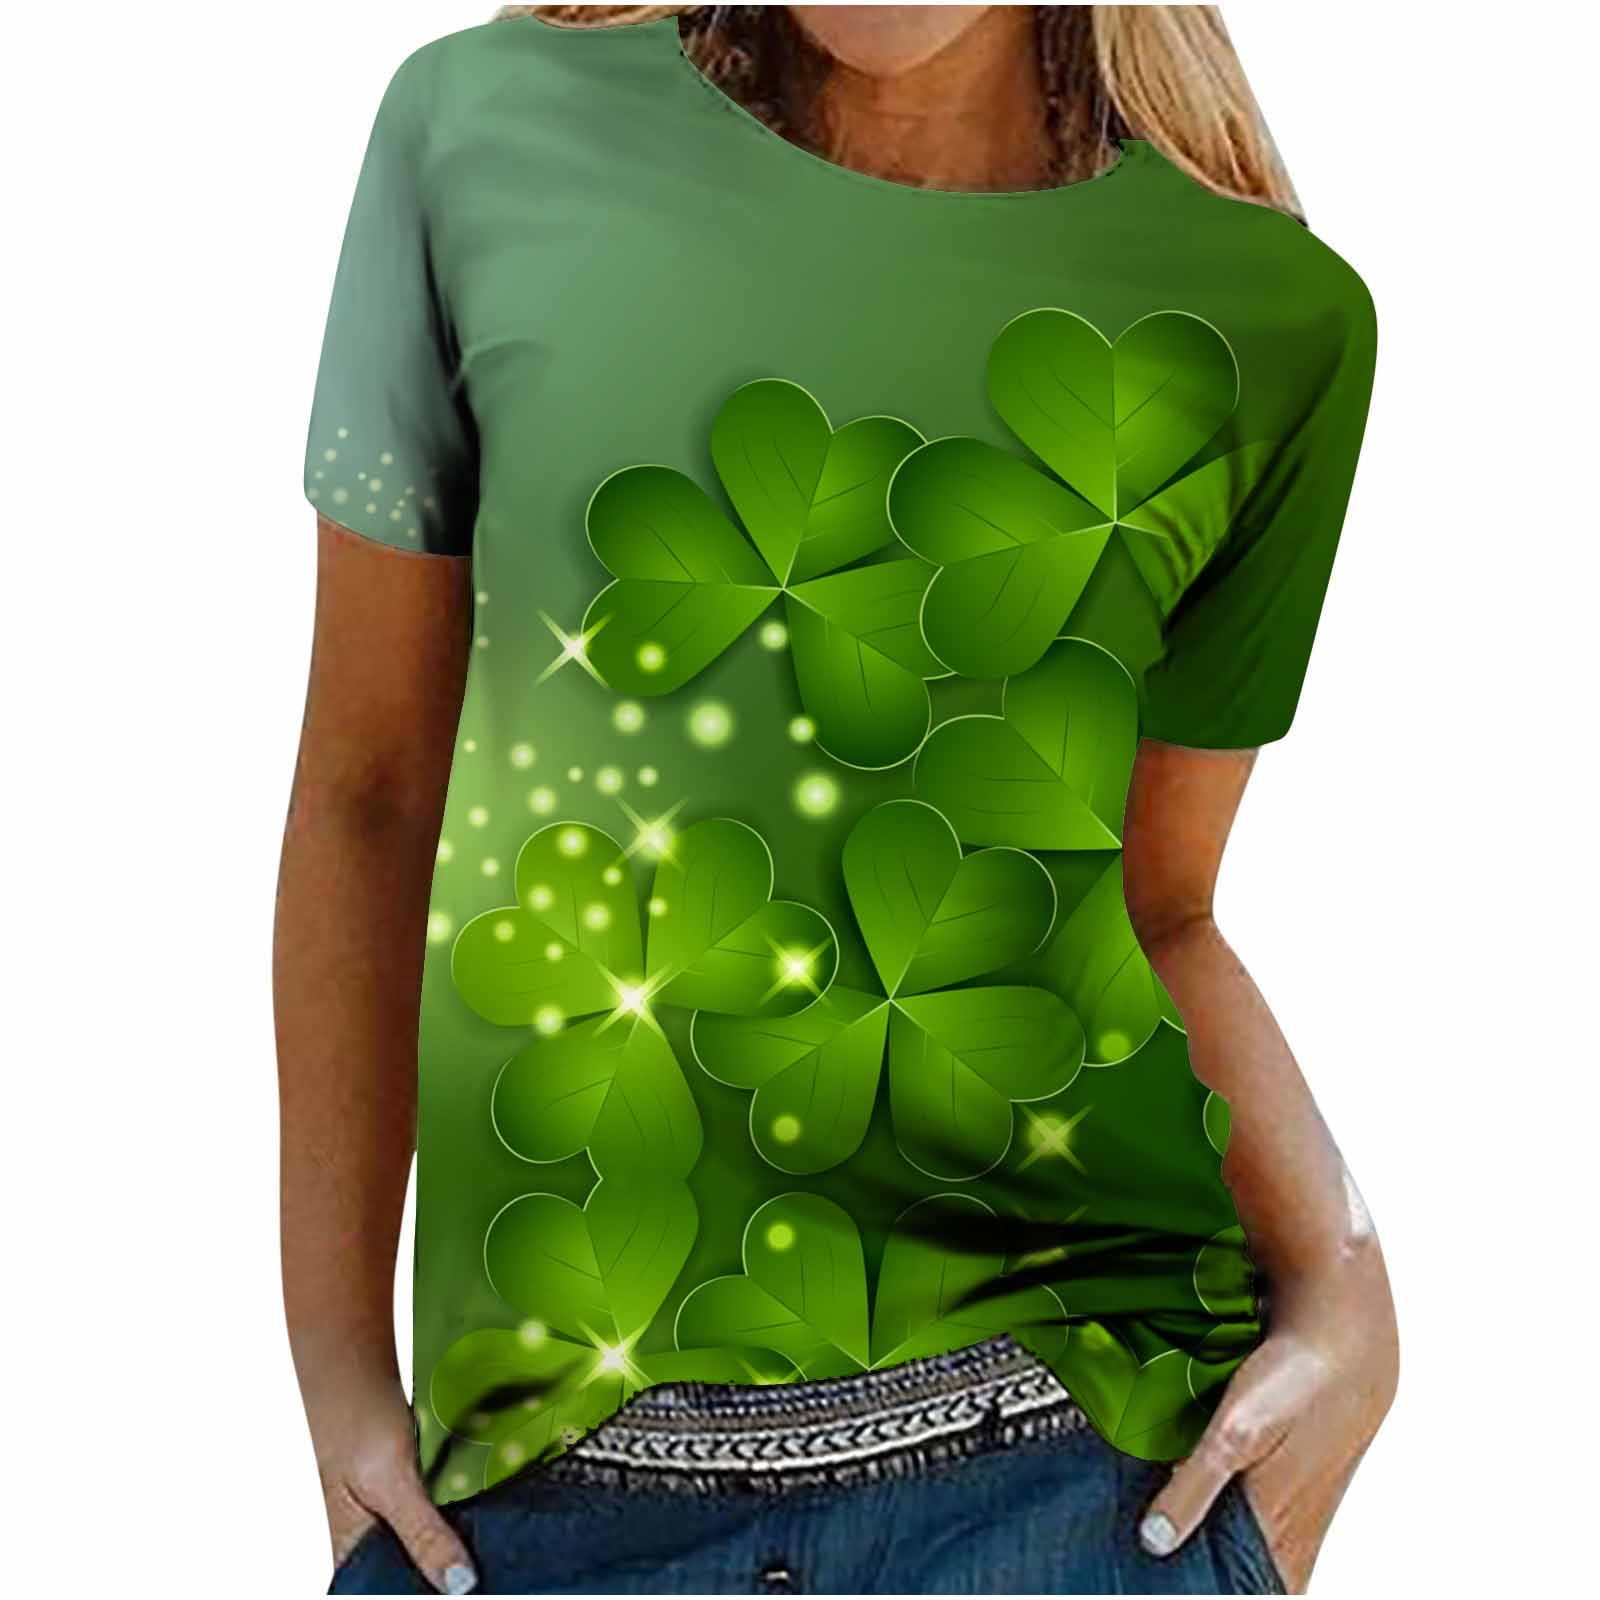 Pntutb Ladies Clearance Clothes,Shirts Womens Tops Funny St. Patricks ...